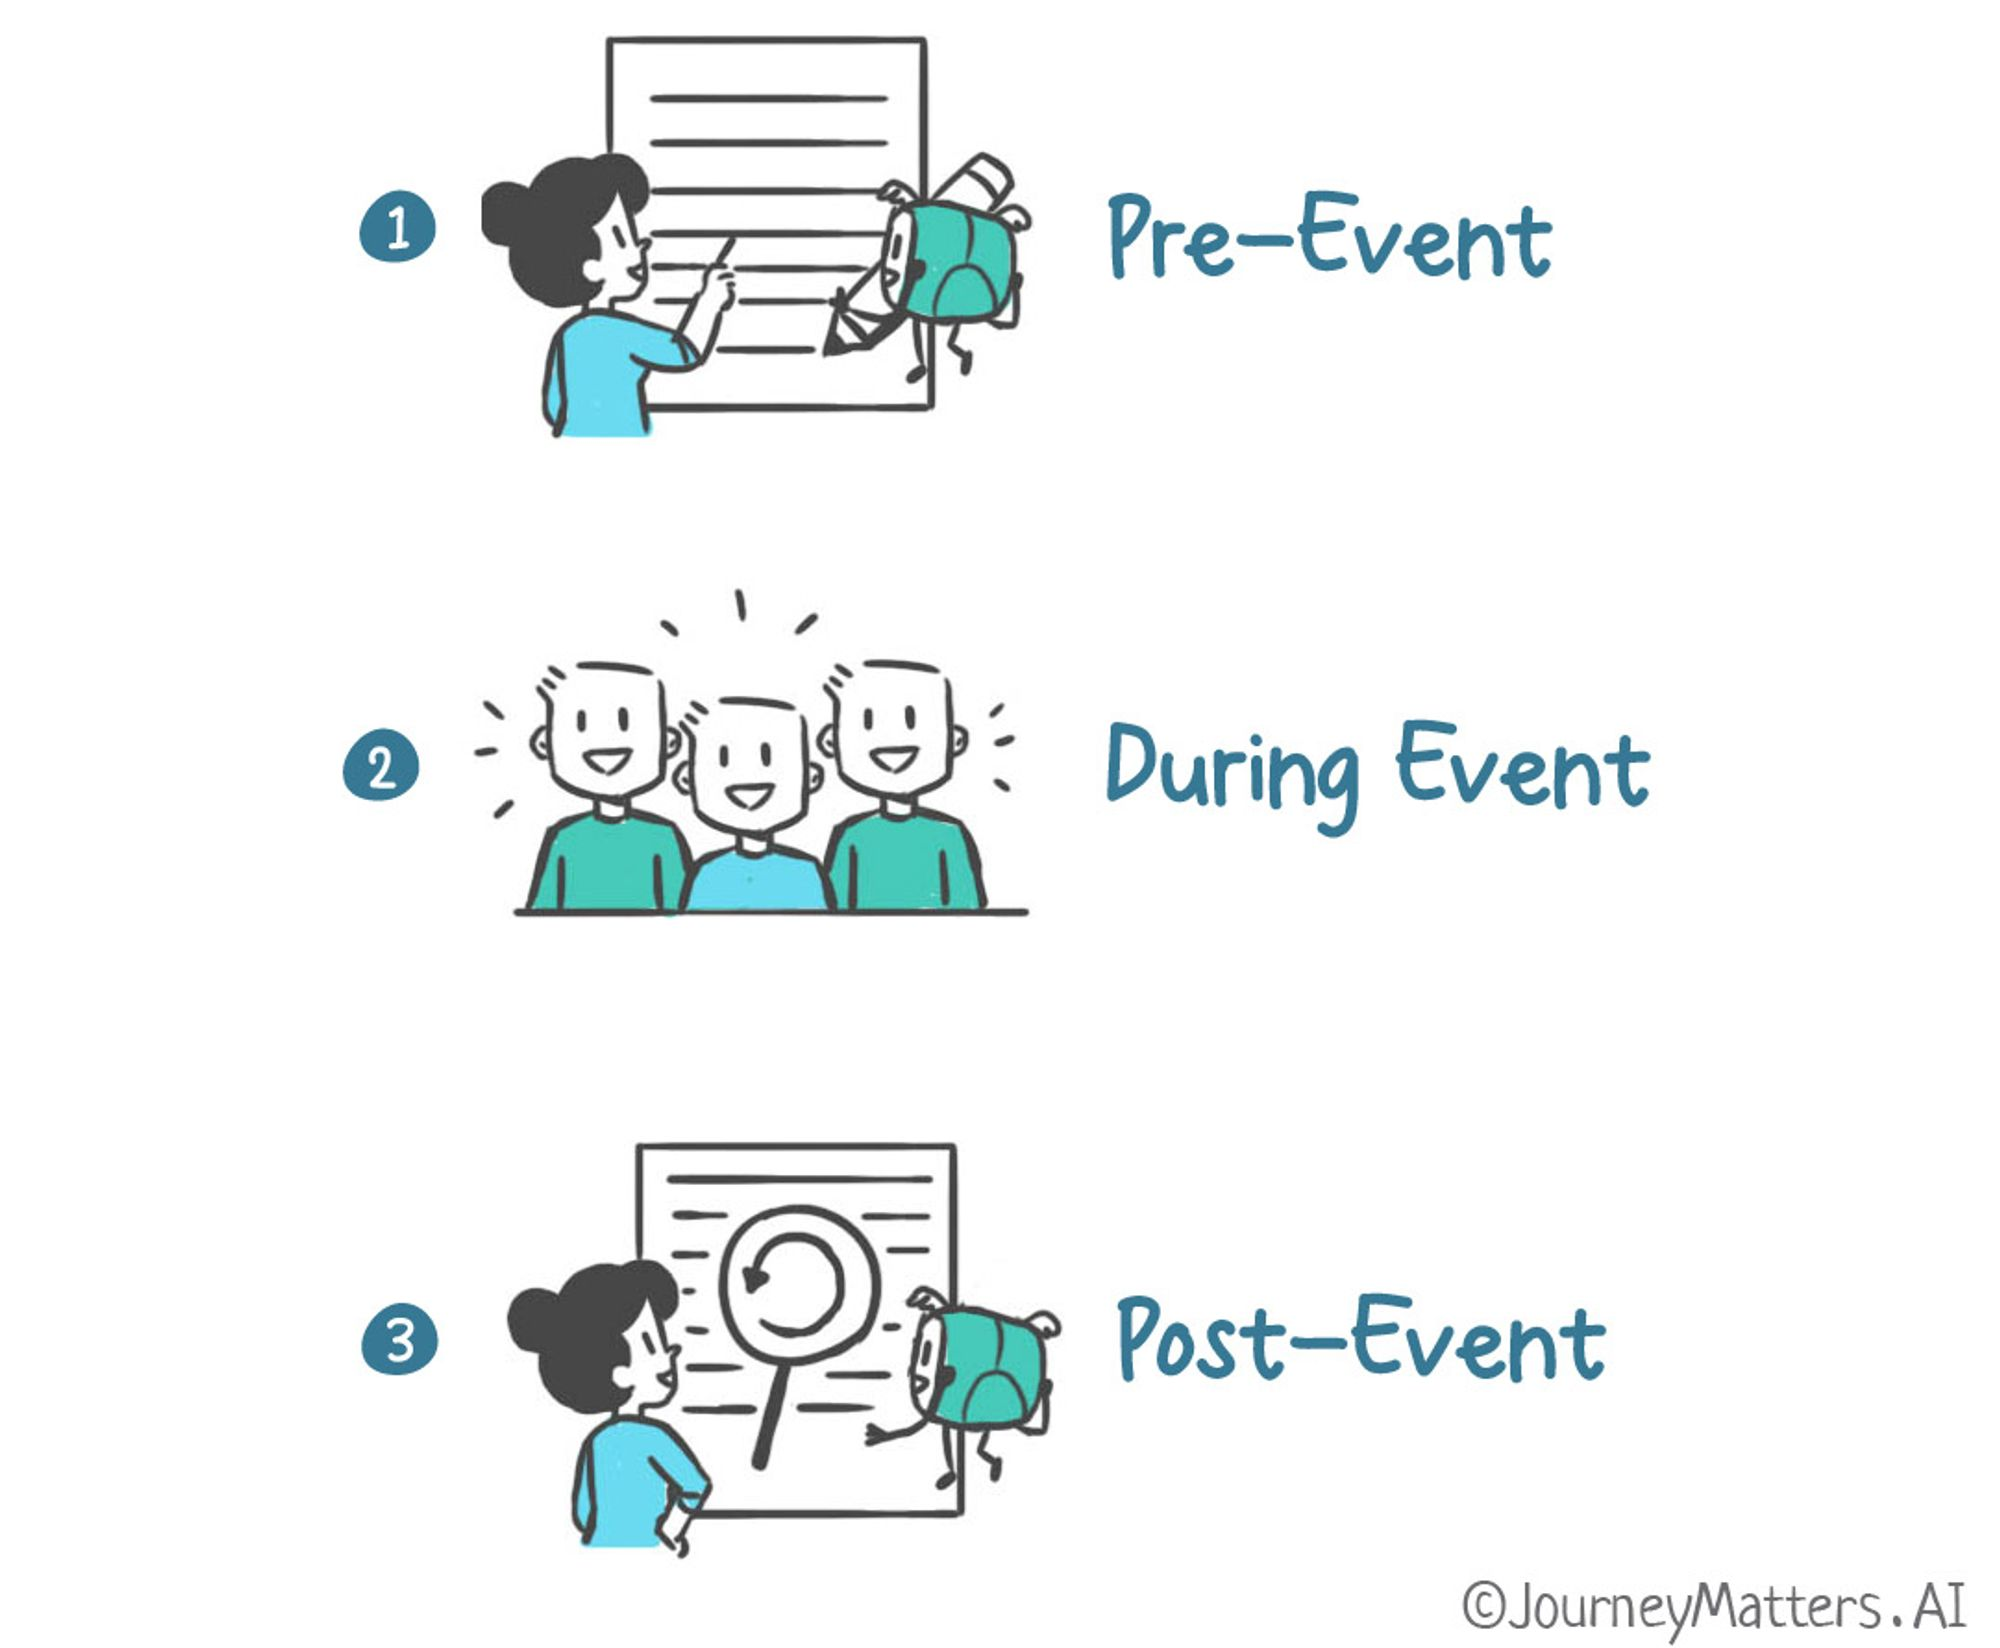 Humans + AI approch helps at all phase of event marketing; pre event, during event and post event